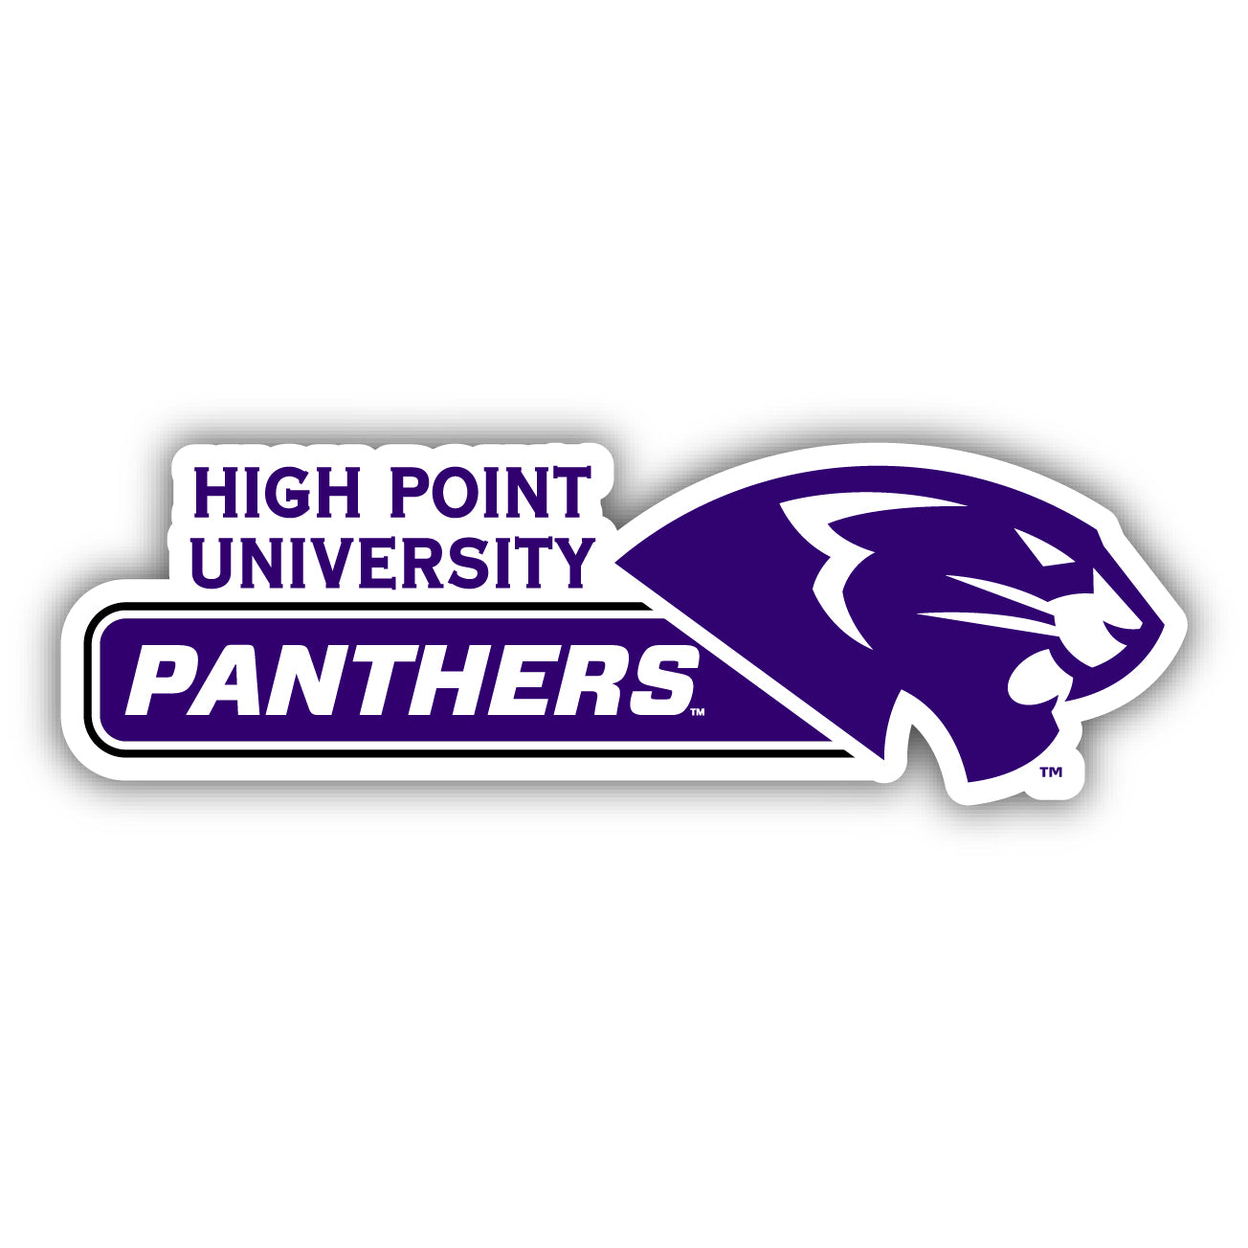 High Point University 4 Inch Wide Colorful Vinyl Decal Sticker